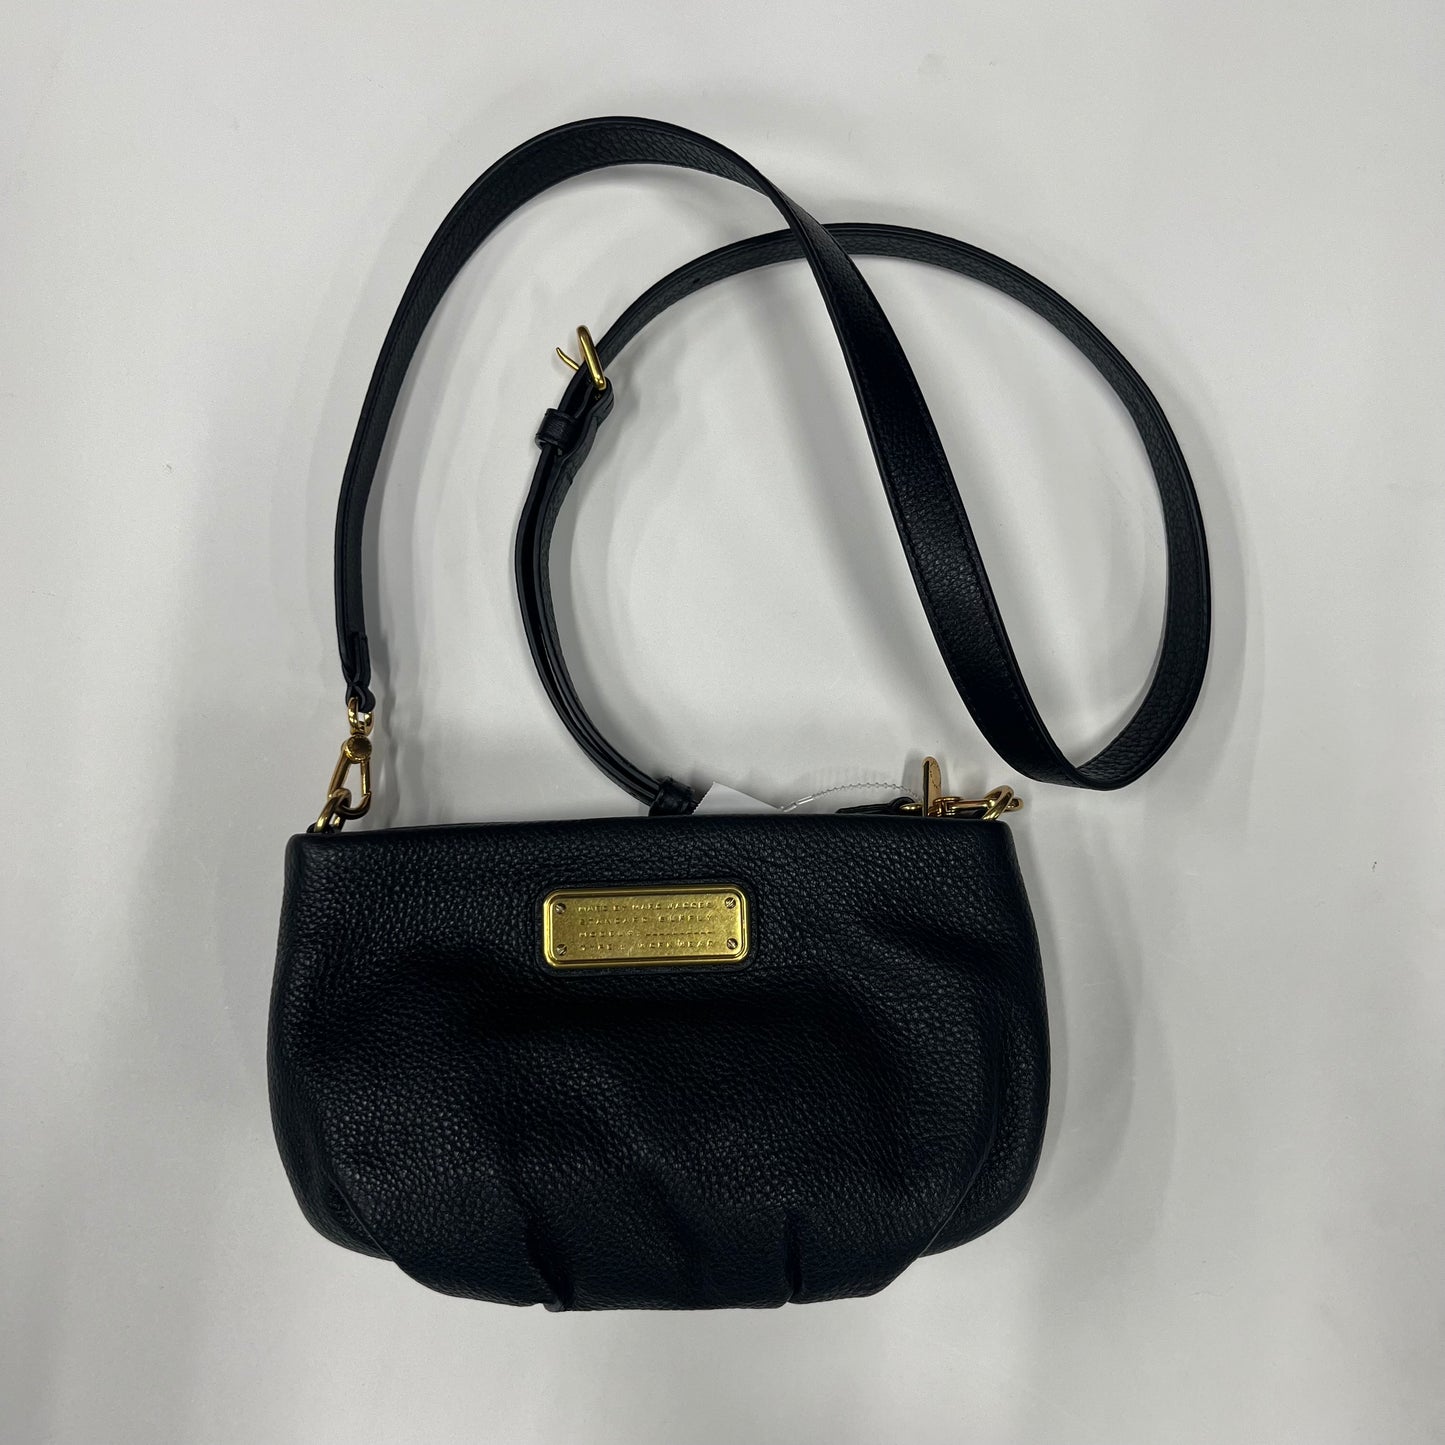 Handbag Designer By Marc By Marc Jacobs  Size: Small